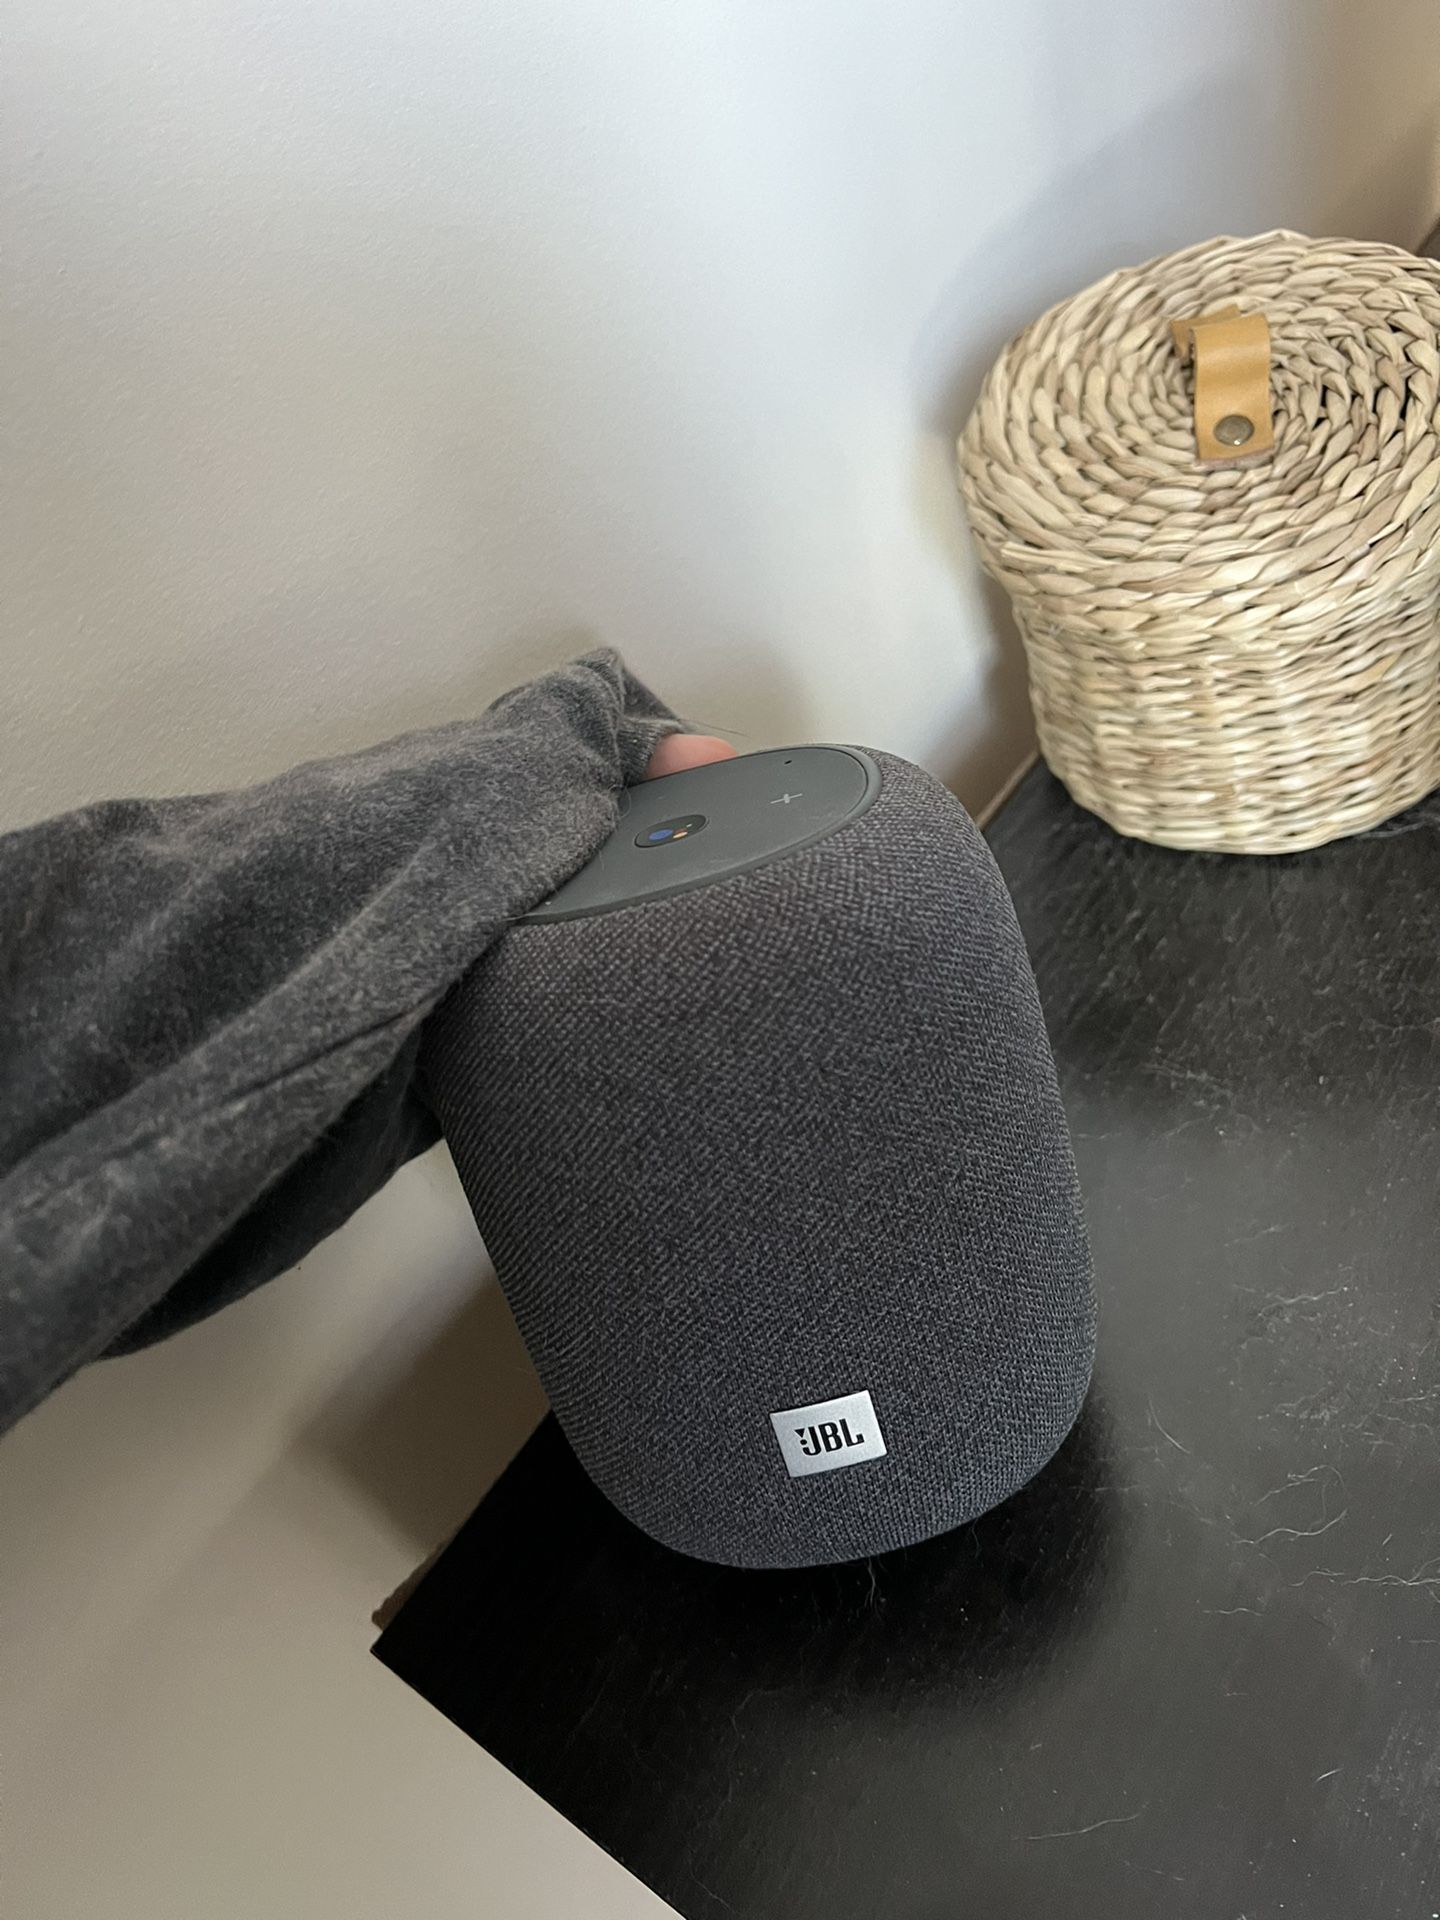 Jbl Wired Speaker With Google Home Assistance 